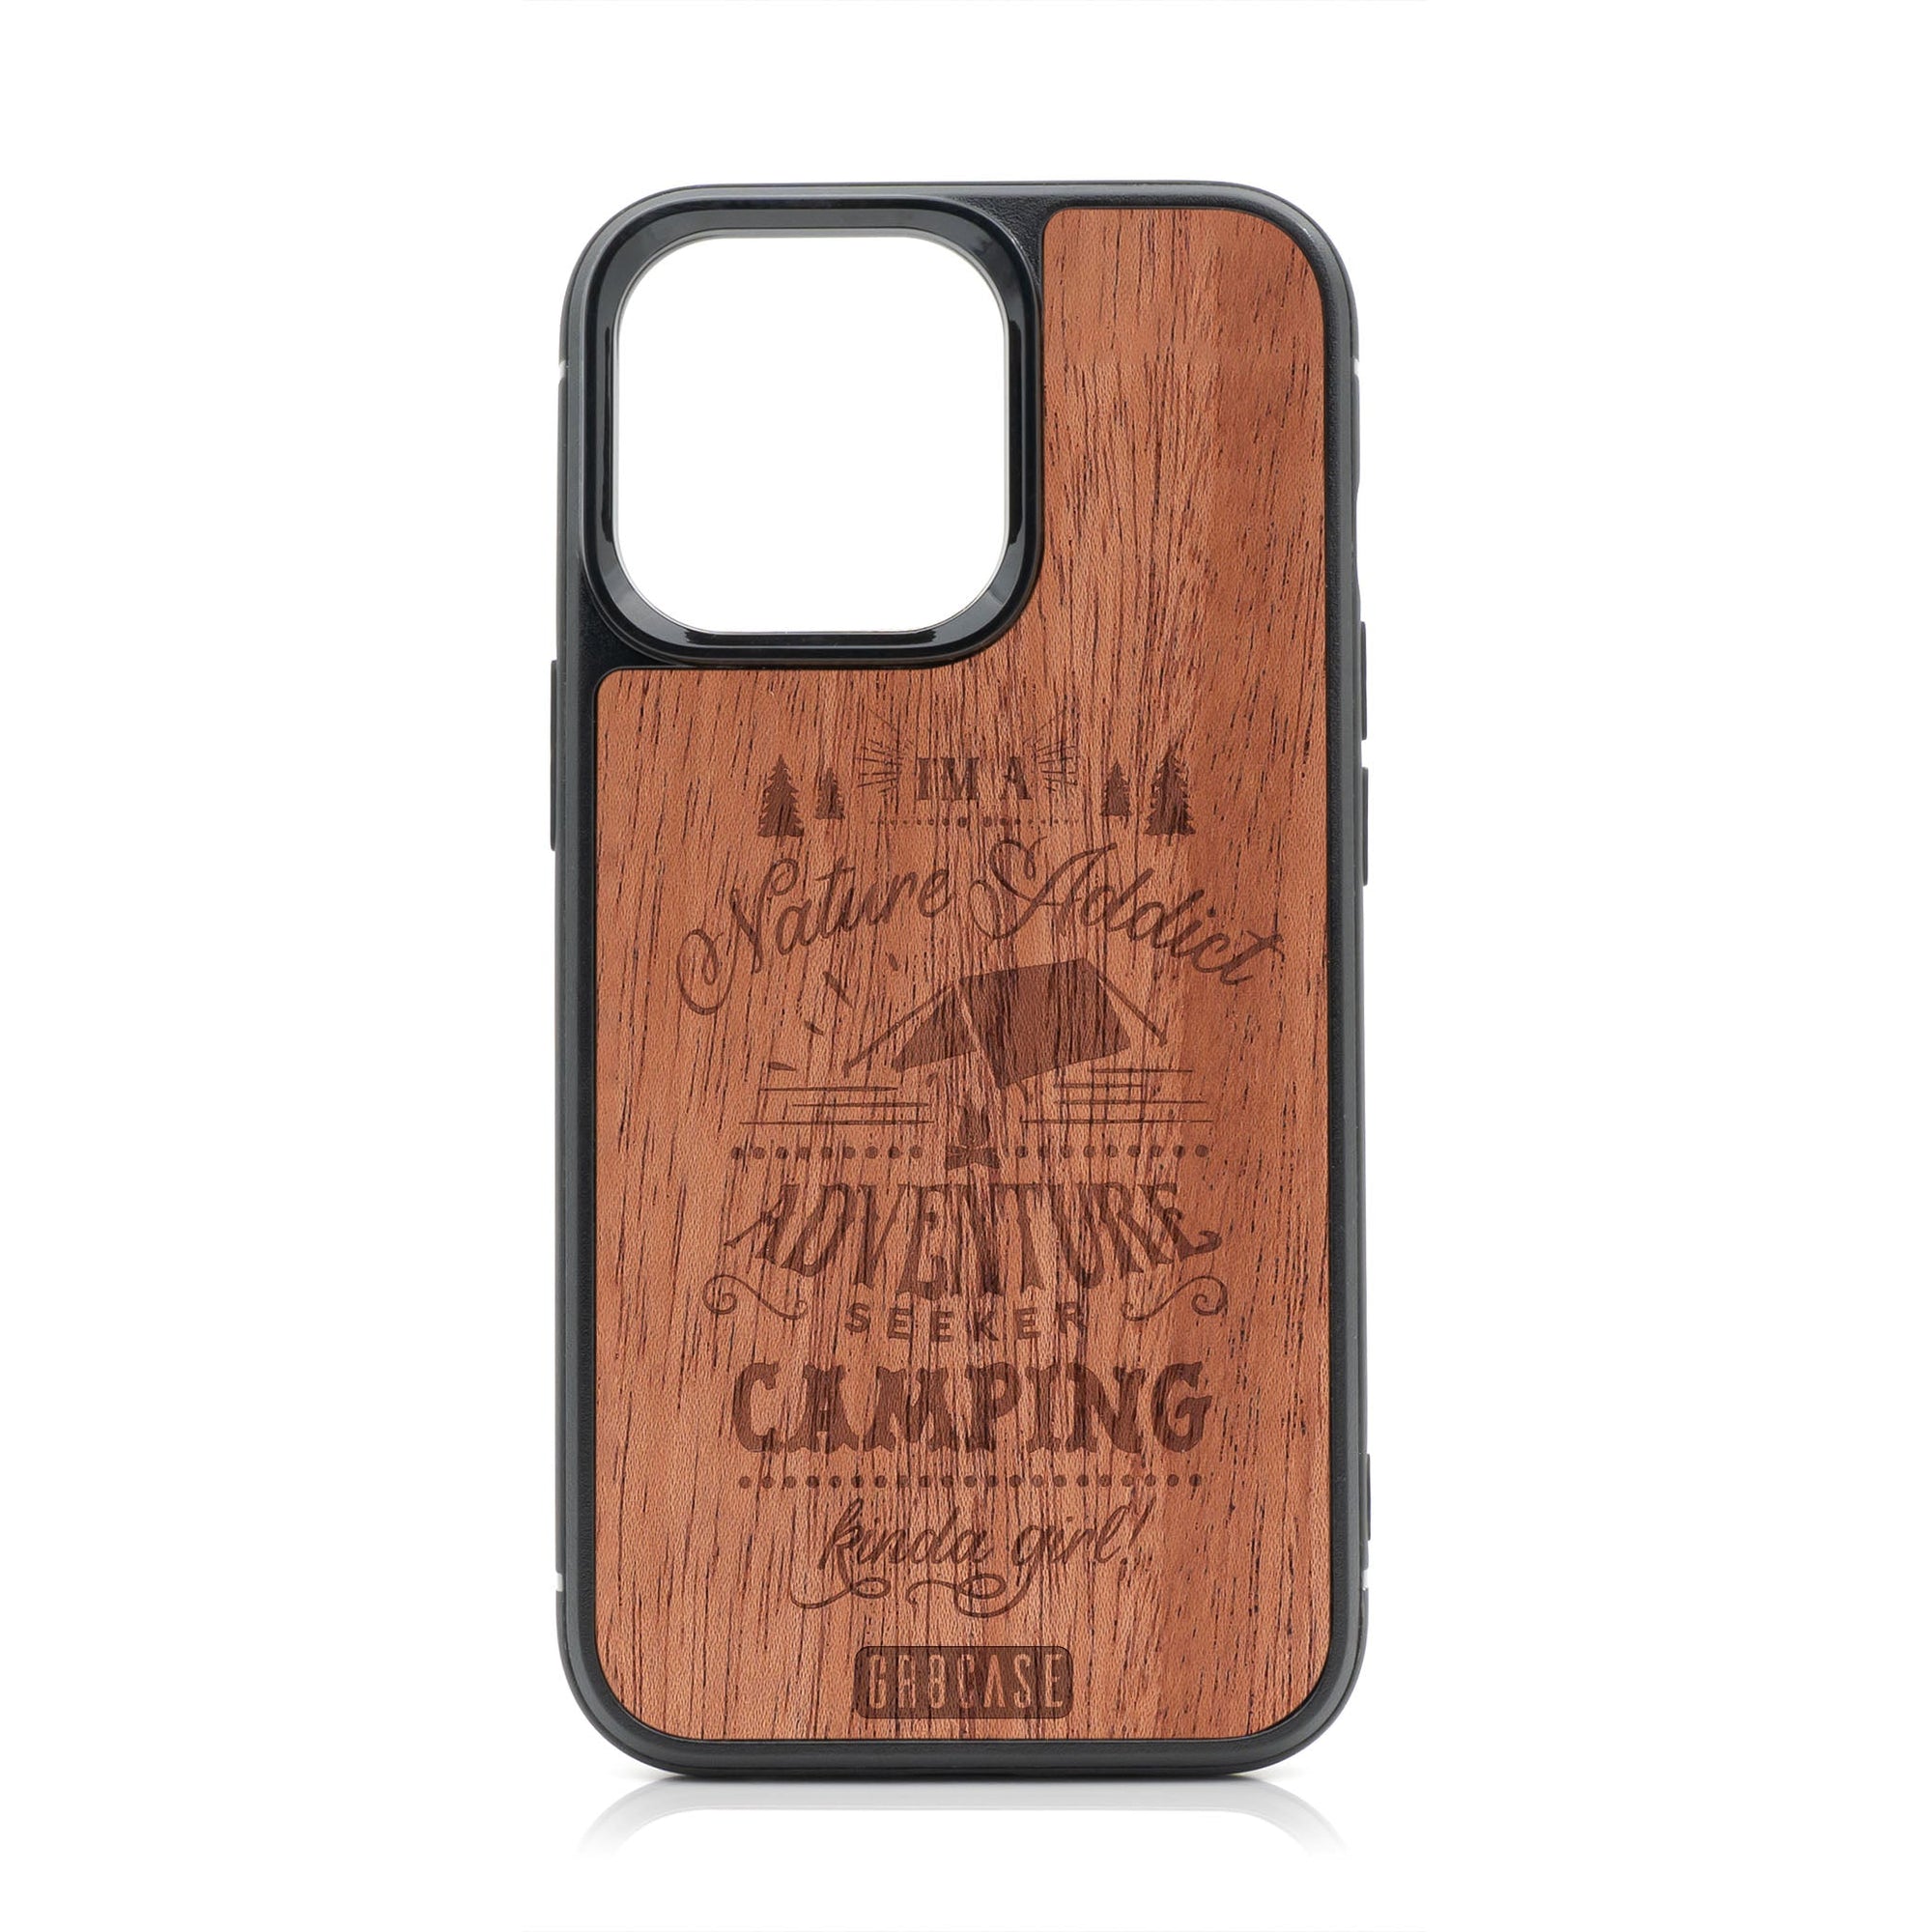 I'm A Nature Addict Adventure Seeker Camping Kinda Girl Design Wood Case For iPhone 14 Pro